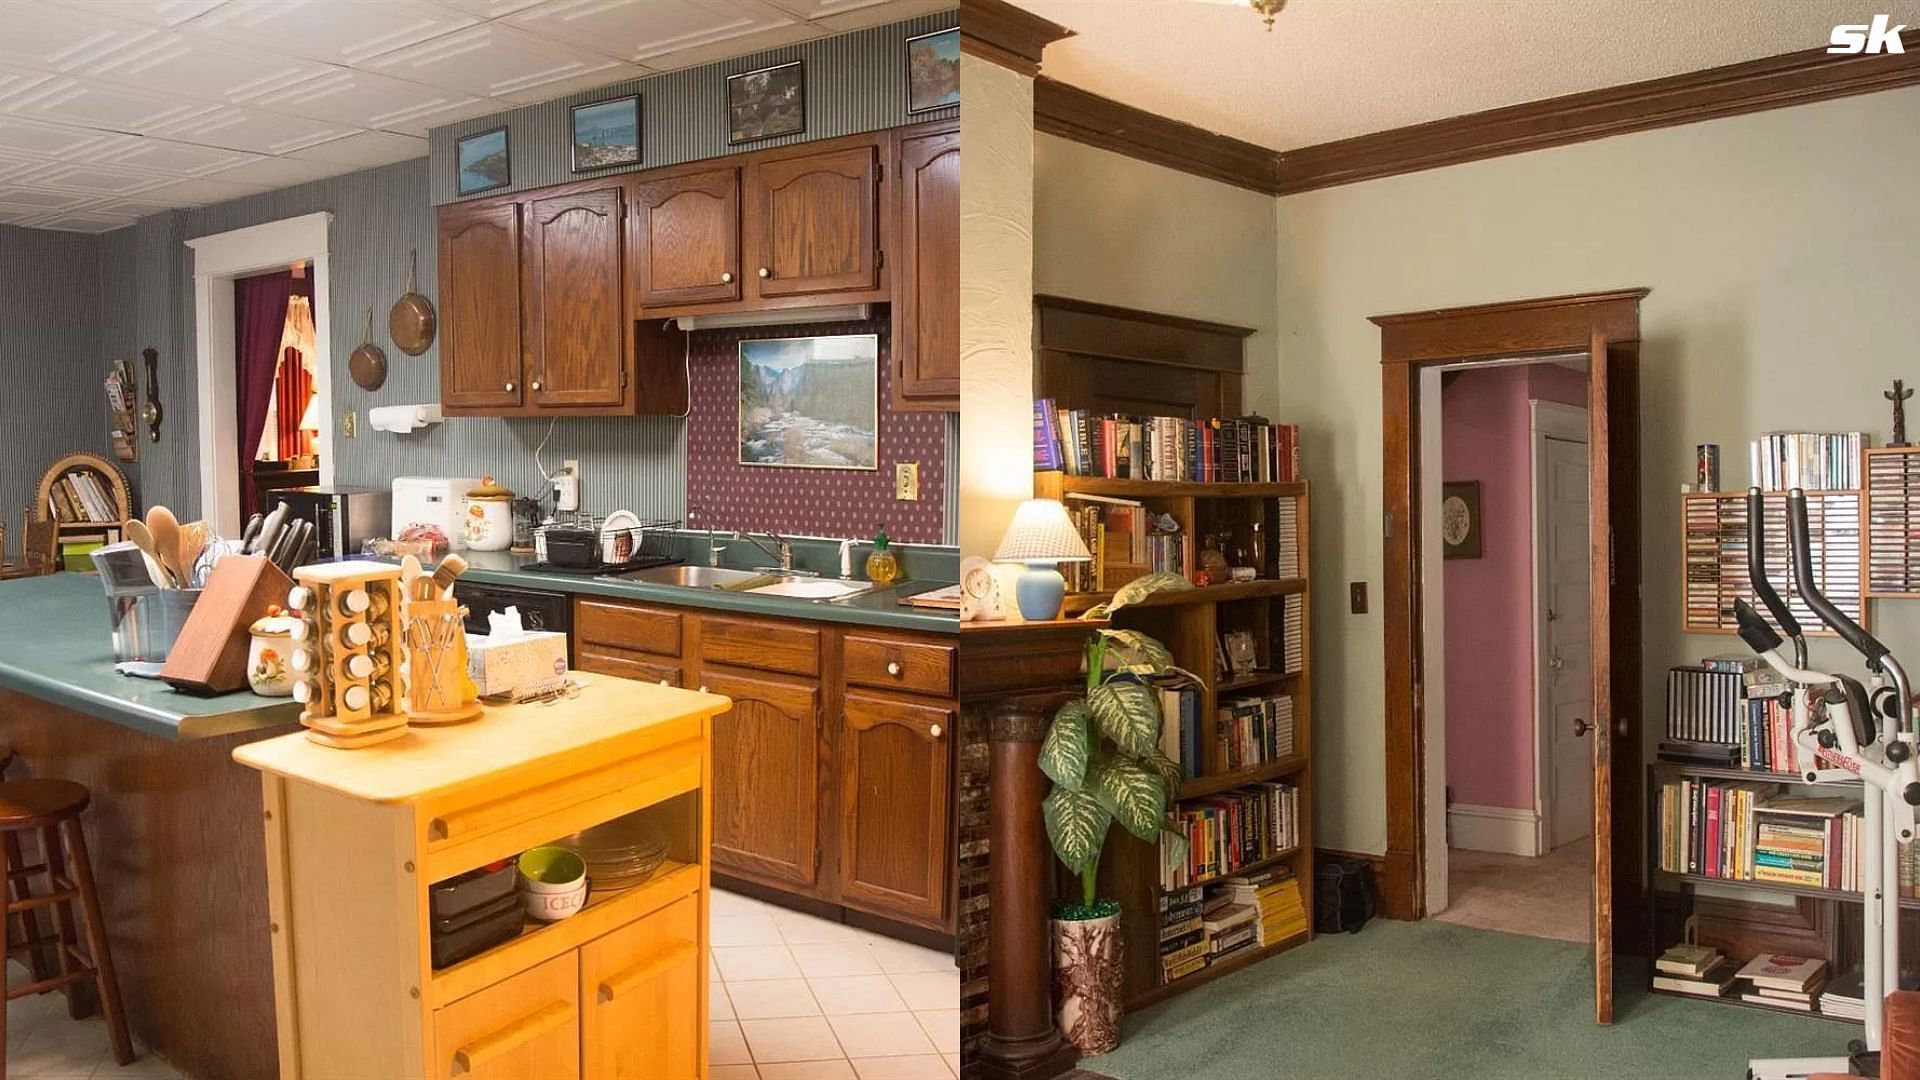 The kitchen and the library room inside the mansion